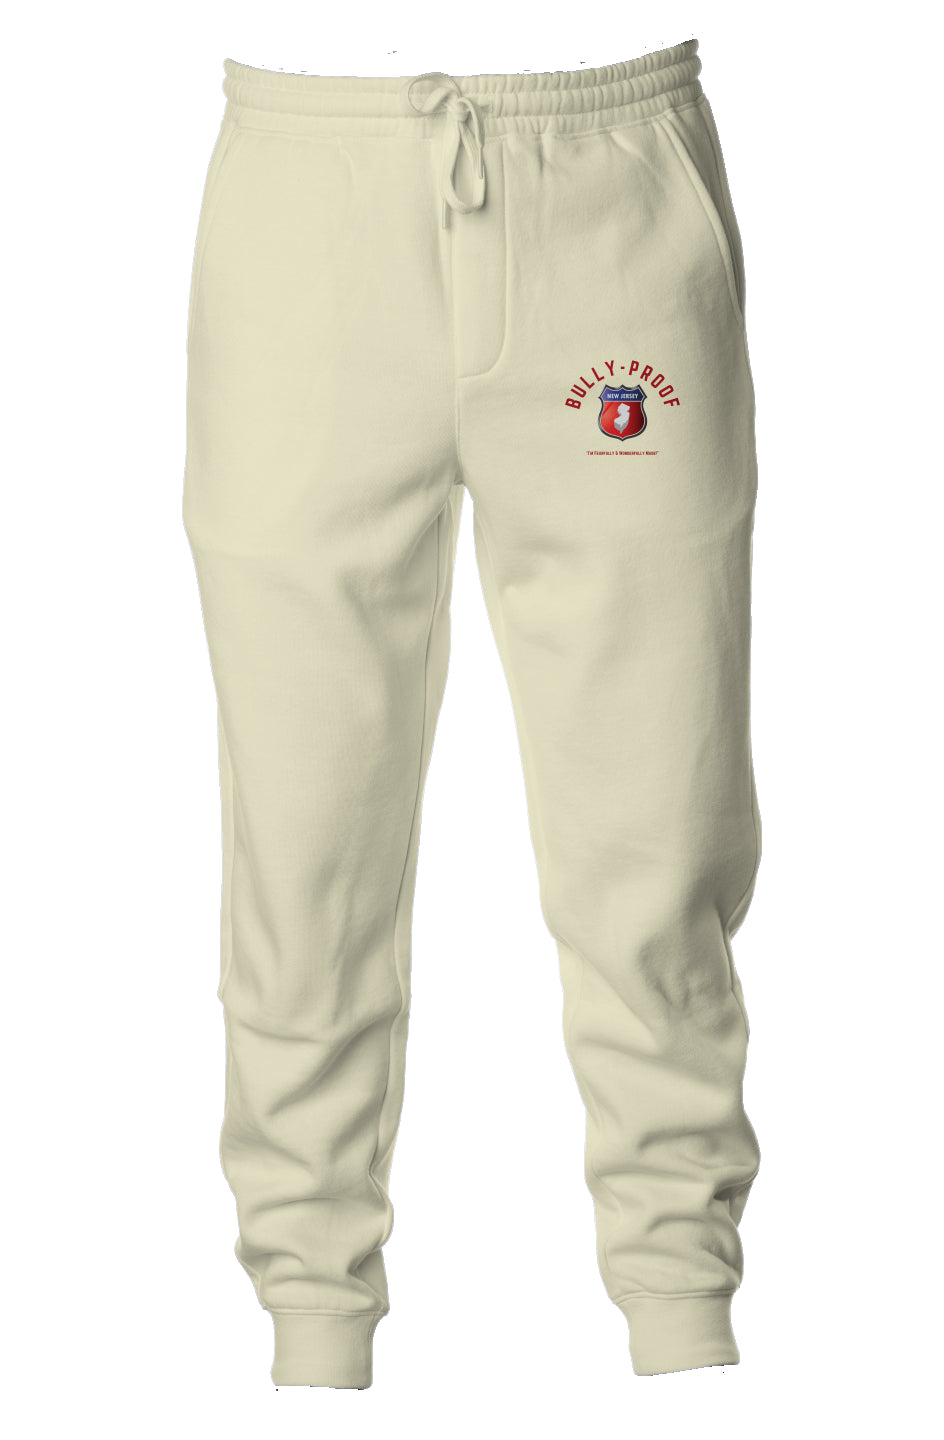 Bully-Proof NJ Collection Midweight Fleece Joggers